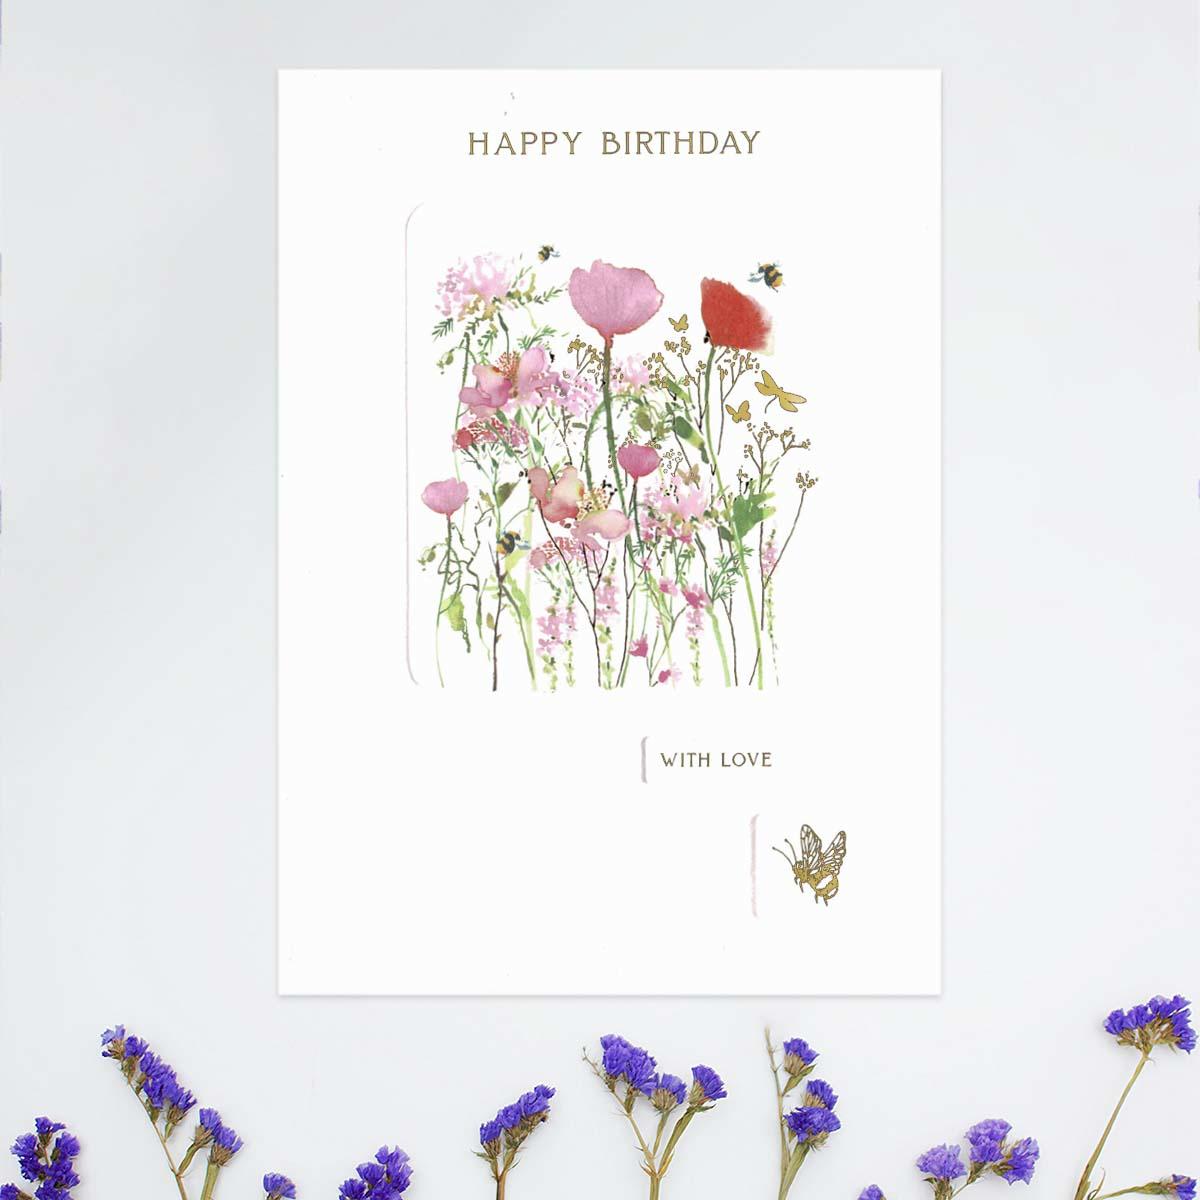 Flower Press - Happy Birthday Poppies & Bees Card Front Image